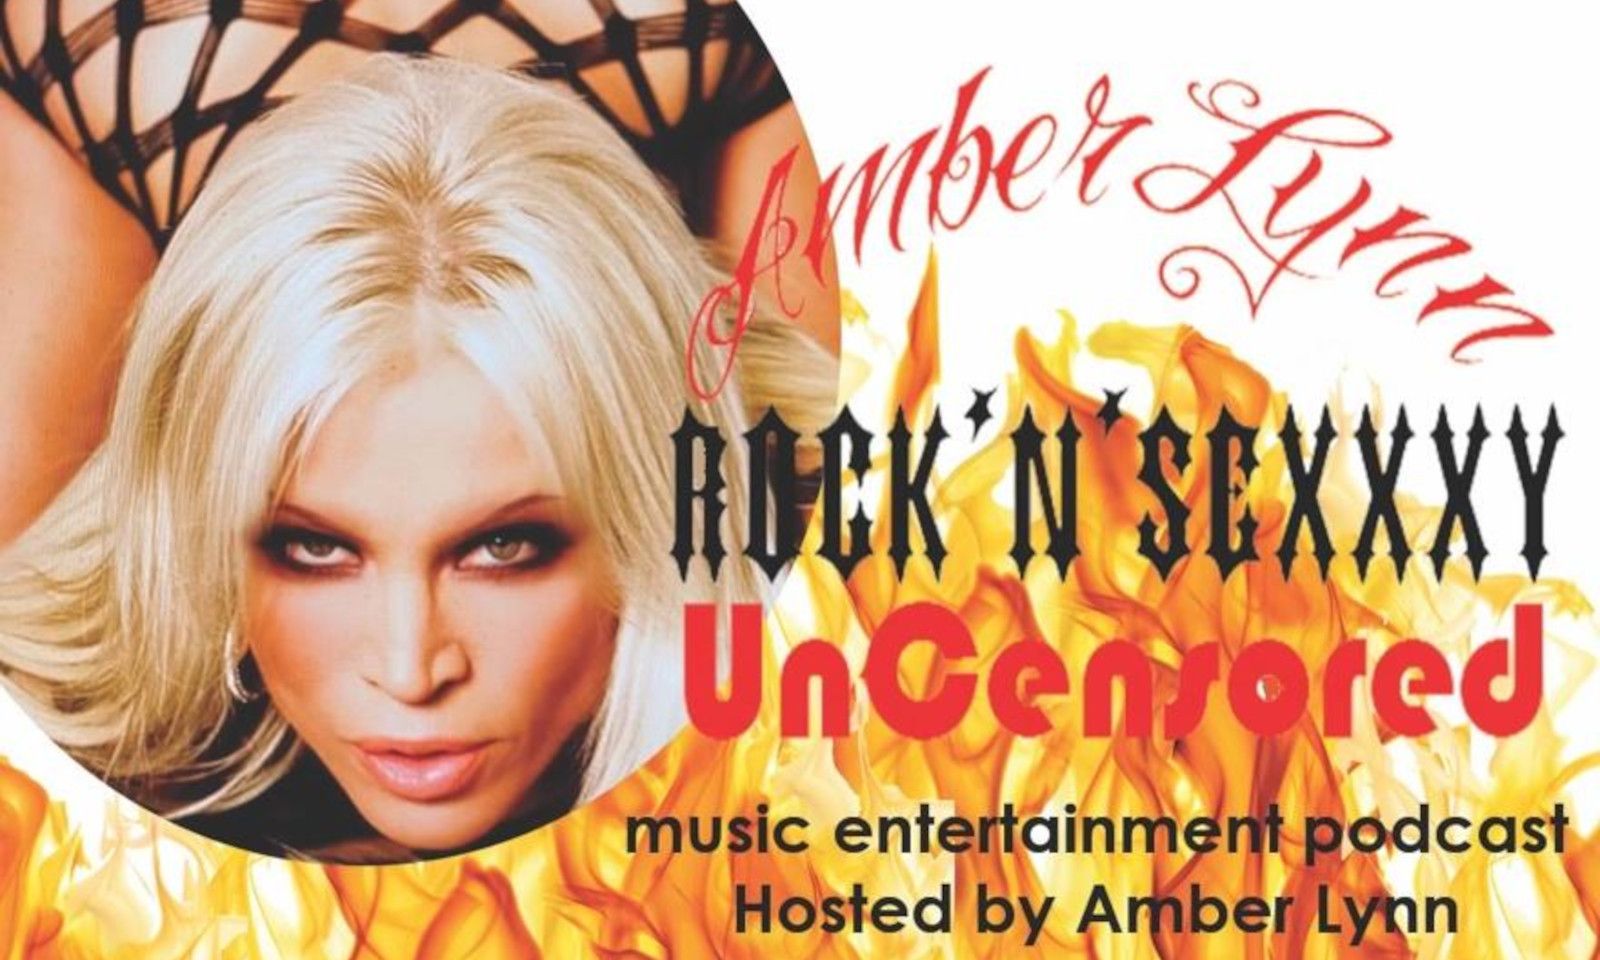 Amber Lynn Relaunches Her Podcast Tonight With Angelyne as Guest